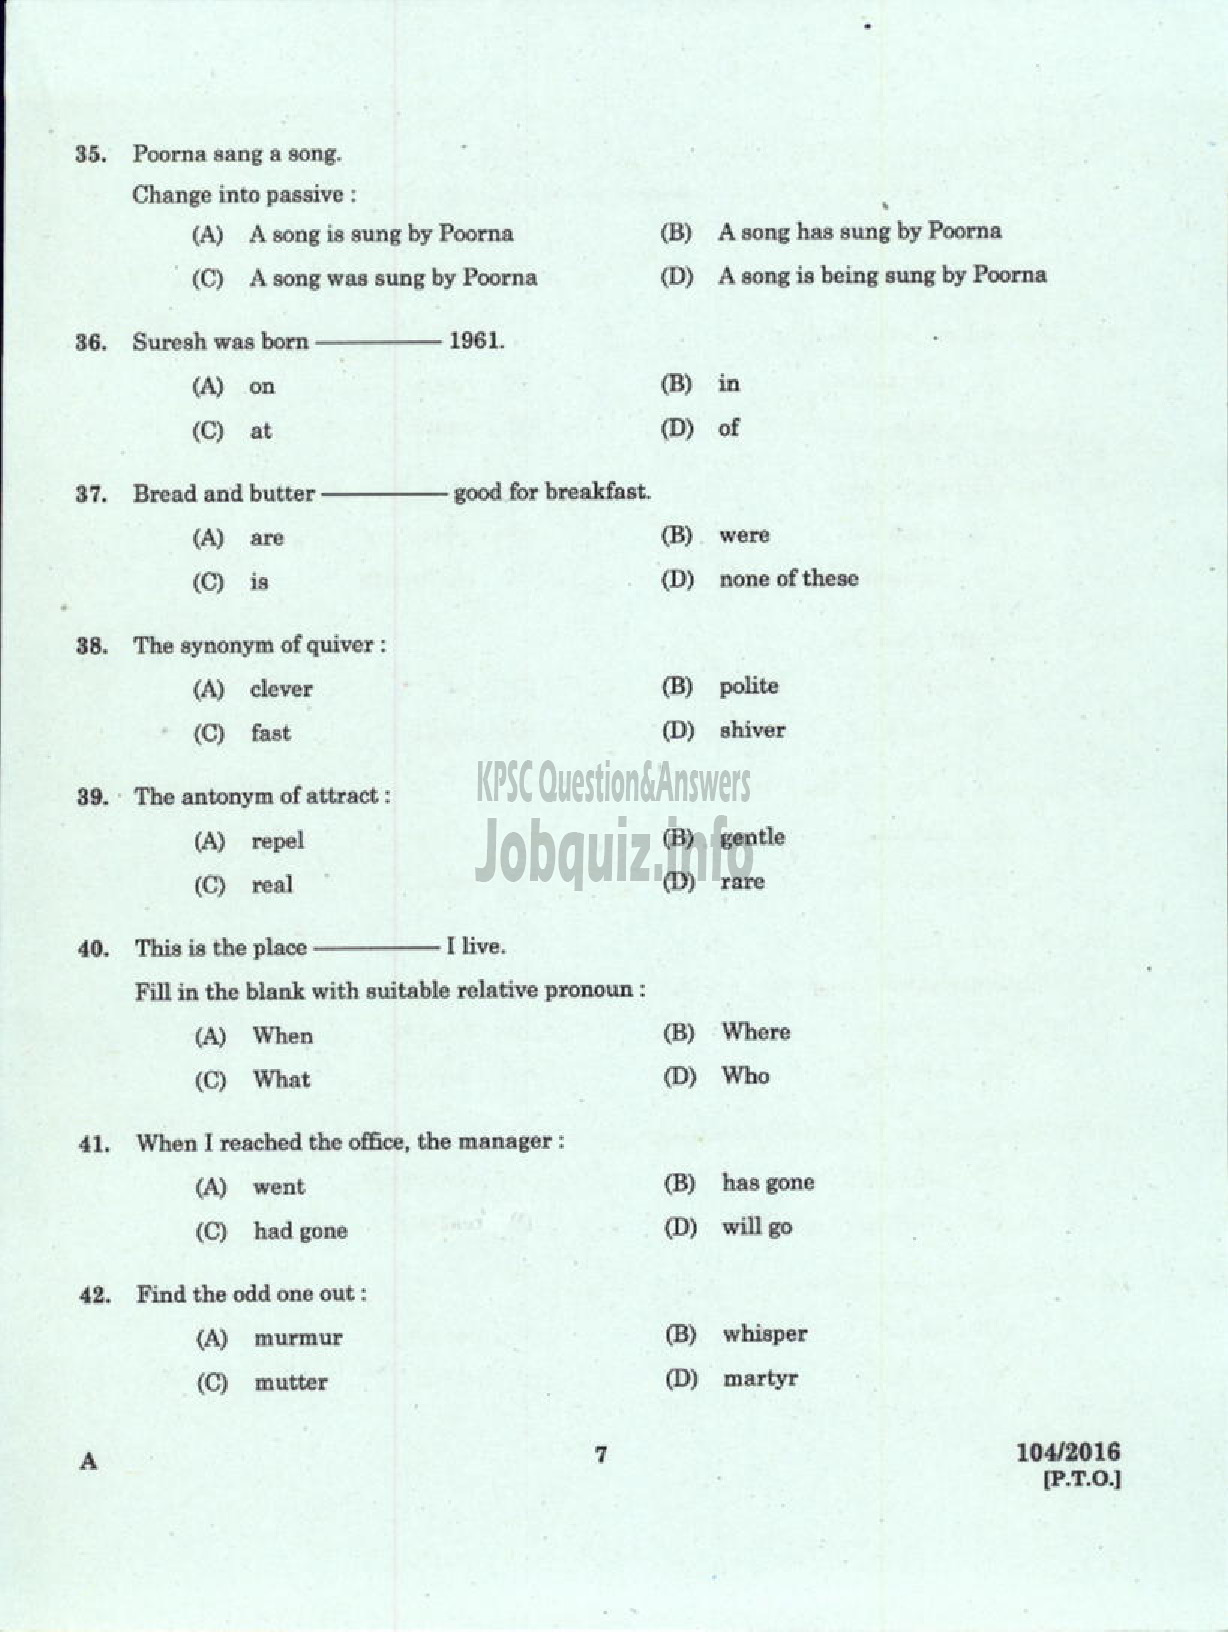 Kerala PSC Question Paper - CONFIDENTIAL ASSISTANT GR II VARIOUS/ GOVT OWNED COMPANY/CORPORATIONS/BOARDS-5